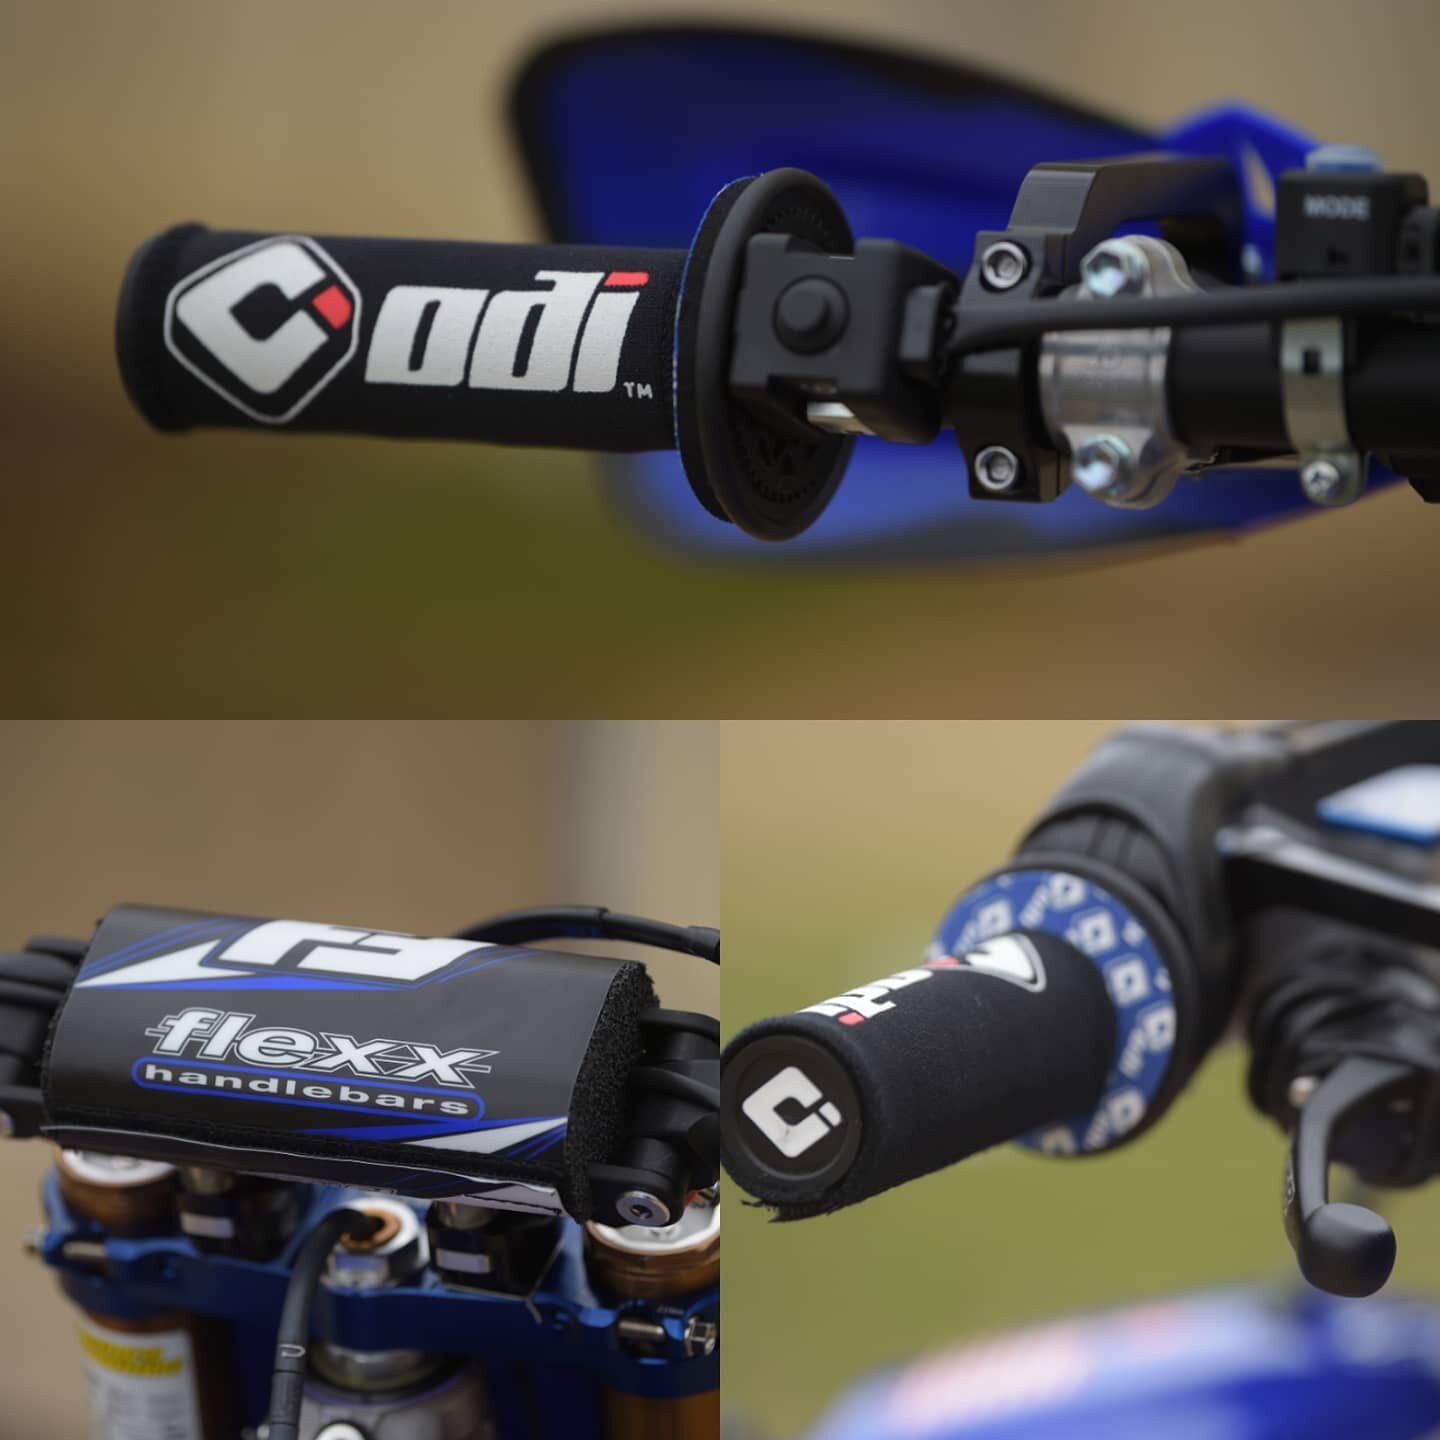 Our #control set up is on point thanks to these incredible sponsors! 🎯👌- Give them a follow and support the companies that support or sport! 
_
@odigrips @fasstcompany @worksconnection @cycra @_xtrig_ @specbolt 
#yamaha #prosetup #offroad #blucru #